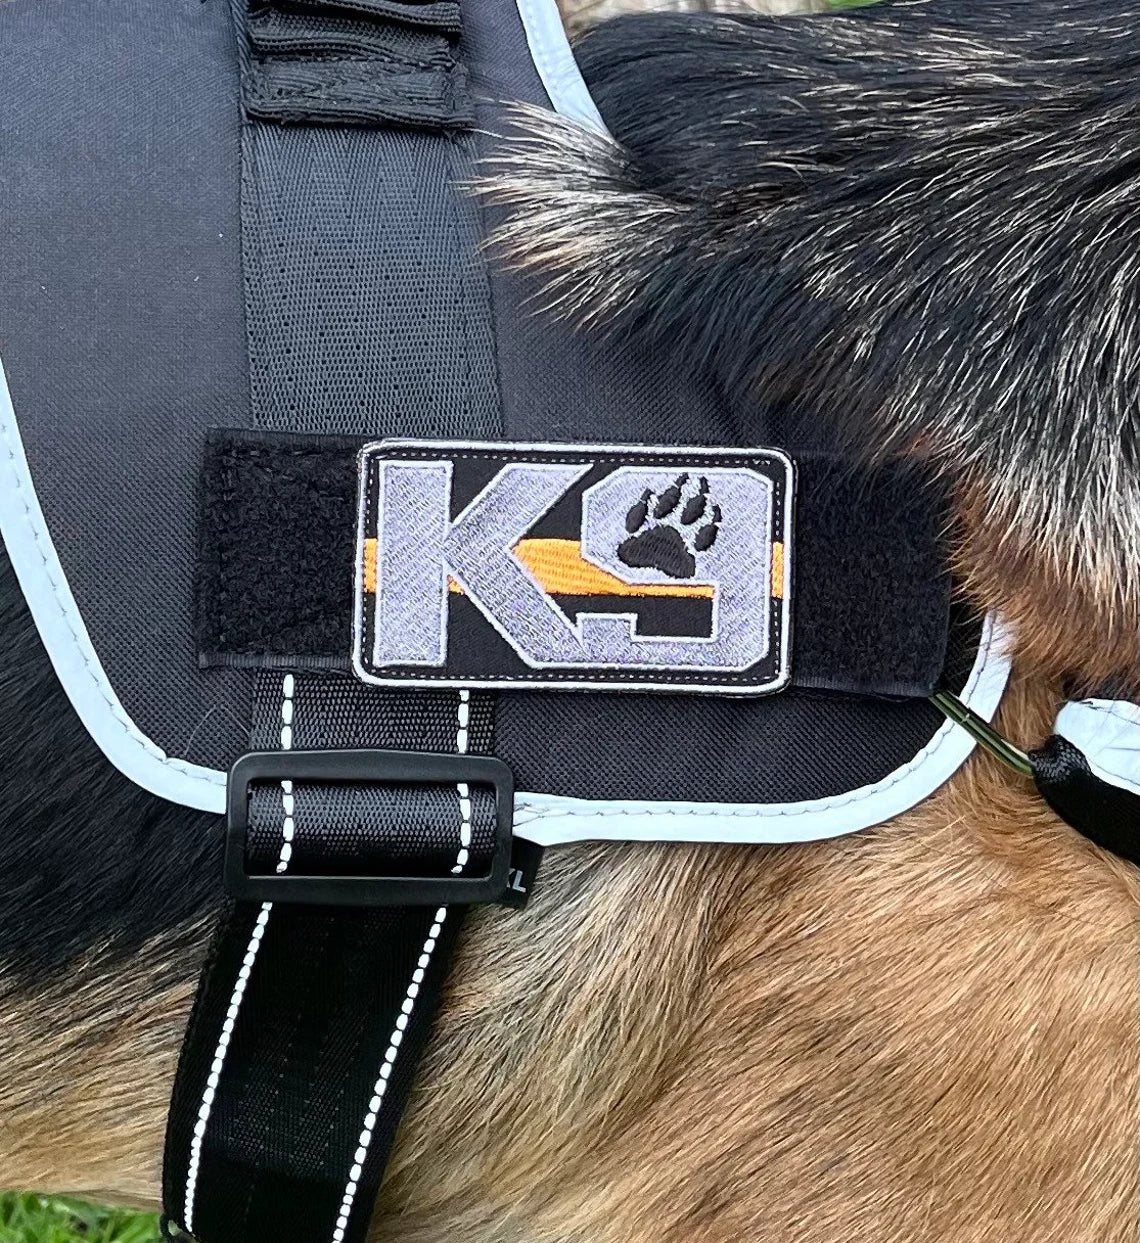 K-9 Thin Orange Line Search and Rescue Patch (3.5 Inch) K9 SAR Velcro Badge